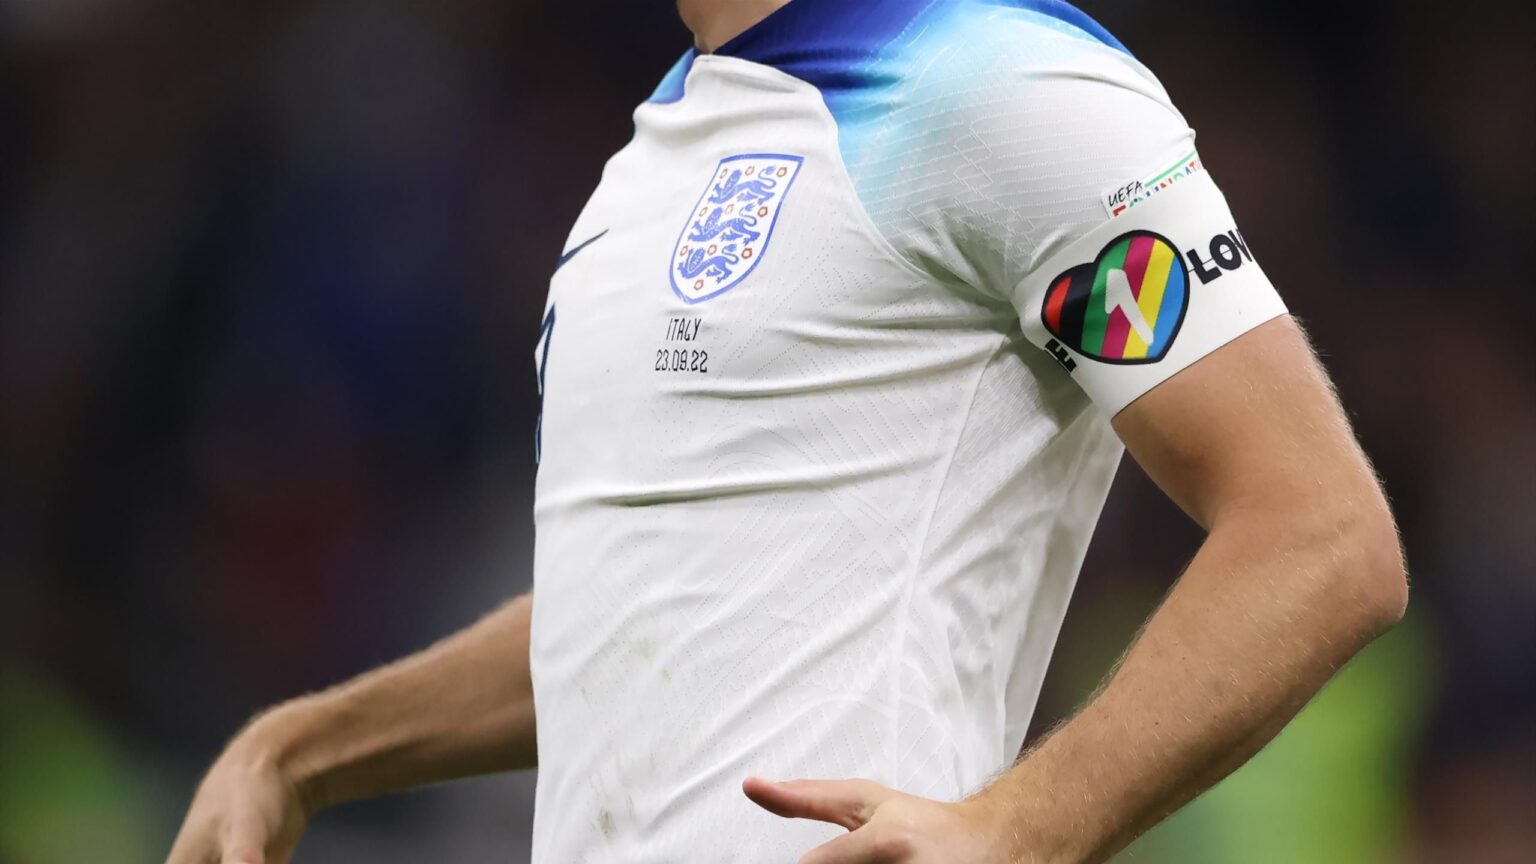 World Cup 2022: England, Wales & other European nations in talks over OneLove armbands